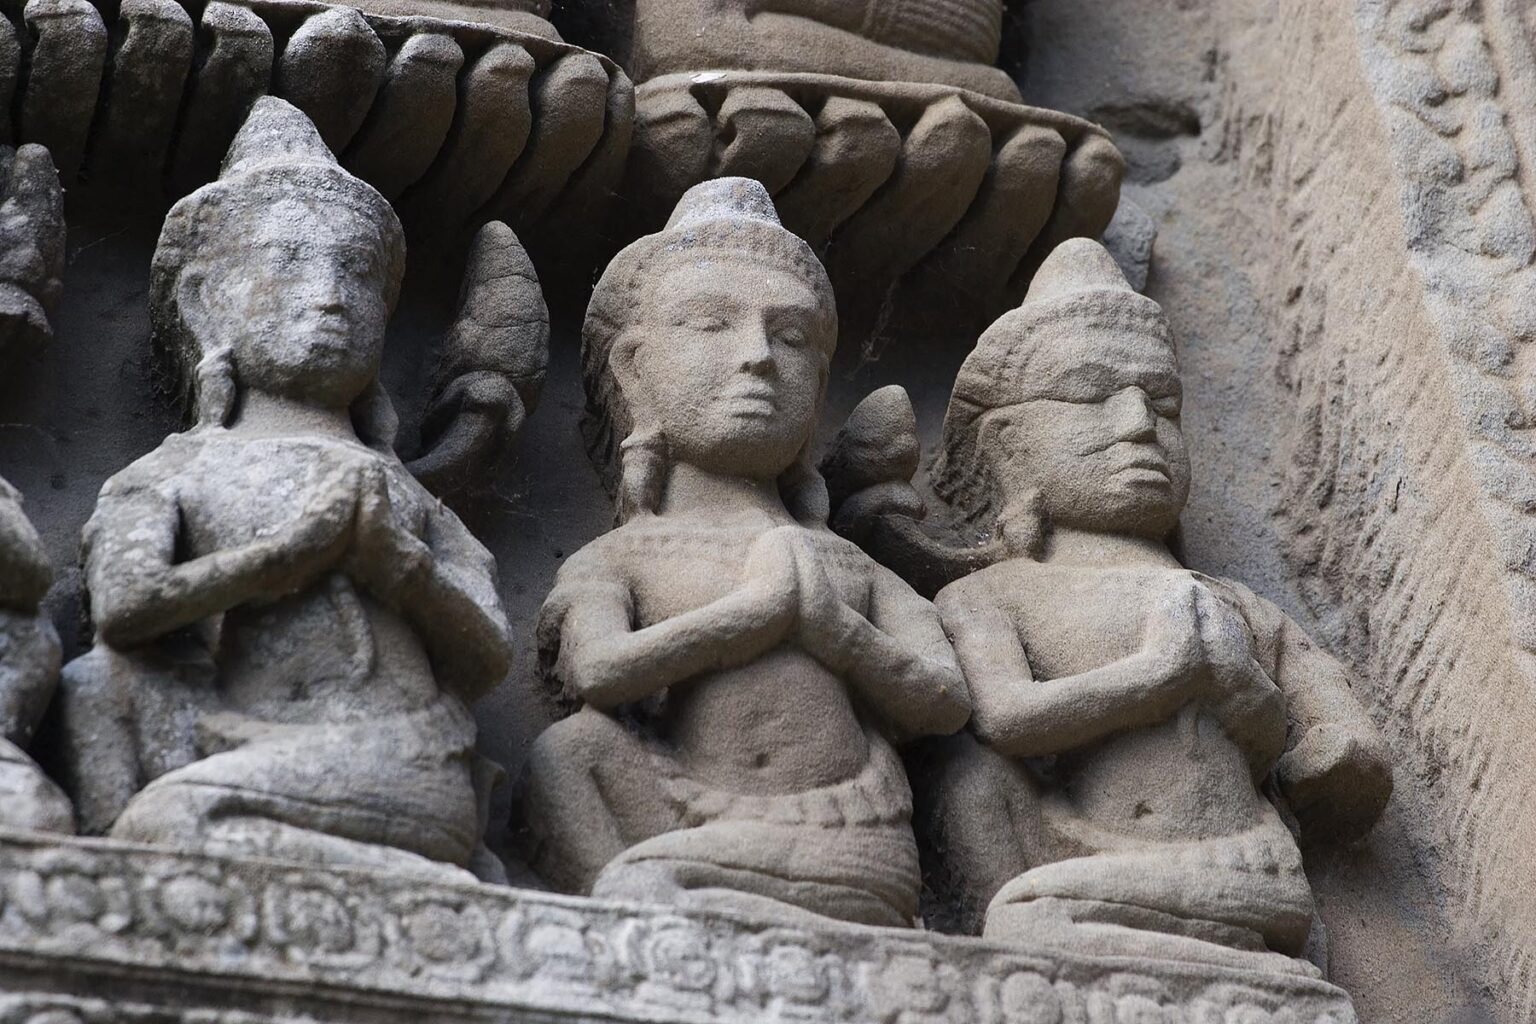 Three bas relief figures in prayer carved on the central Temple representing Mount Meru at Angkor Wat, built in the 11th century by Suryavarman the 2nd - Cambodia